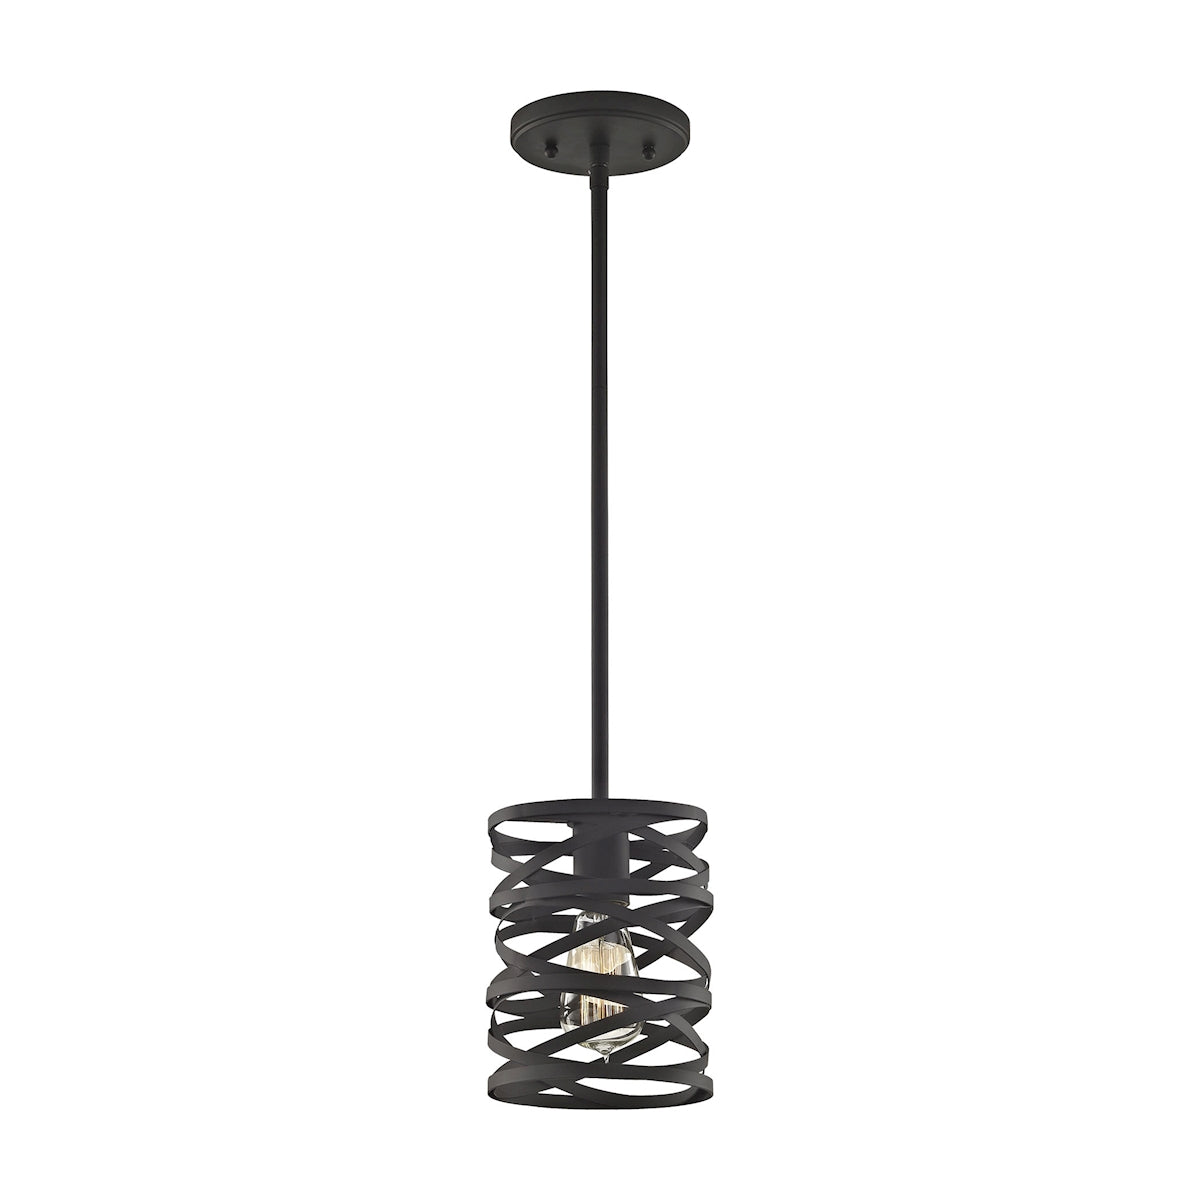 ELK Lighting 81184/1 Vorticy 1-Light Mini Pendant in Oil Rubbed Bronze with Metal Cage